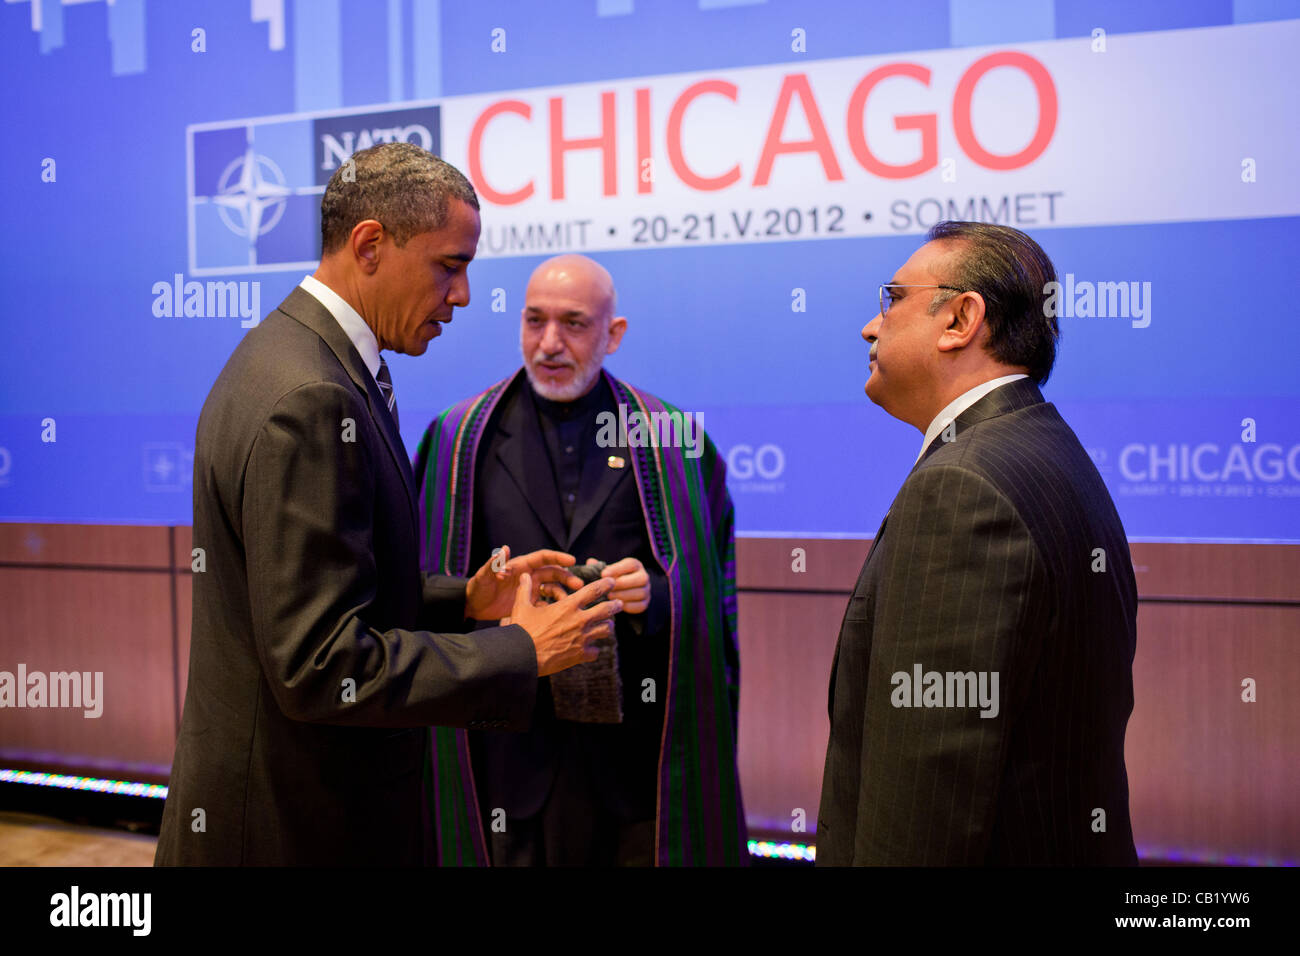 US President Barack Obama speaks with President Hamid Karzai of Afghanistan, center, and President Asif Ali Zardari of Pakistan at the McCormick Place Convention Center during the NATO Summit May 21, 2012 in Chicago, Illinois. NATO leaders reached agreement on ending combat operations in Afghanistan Stock Photo